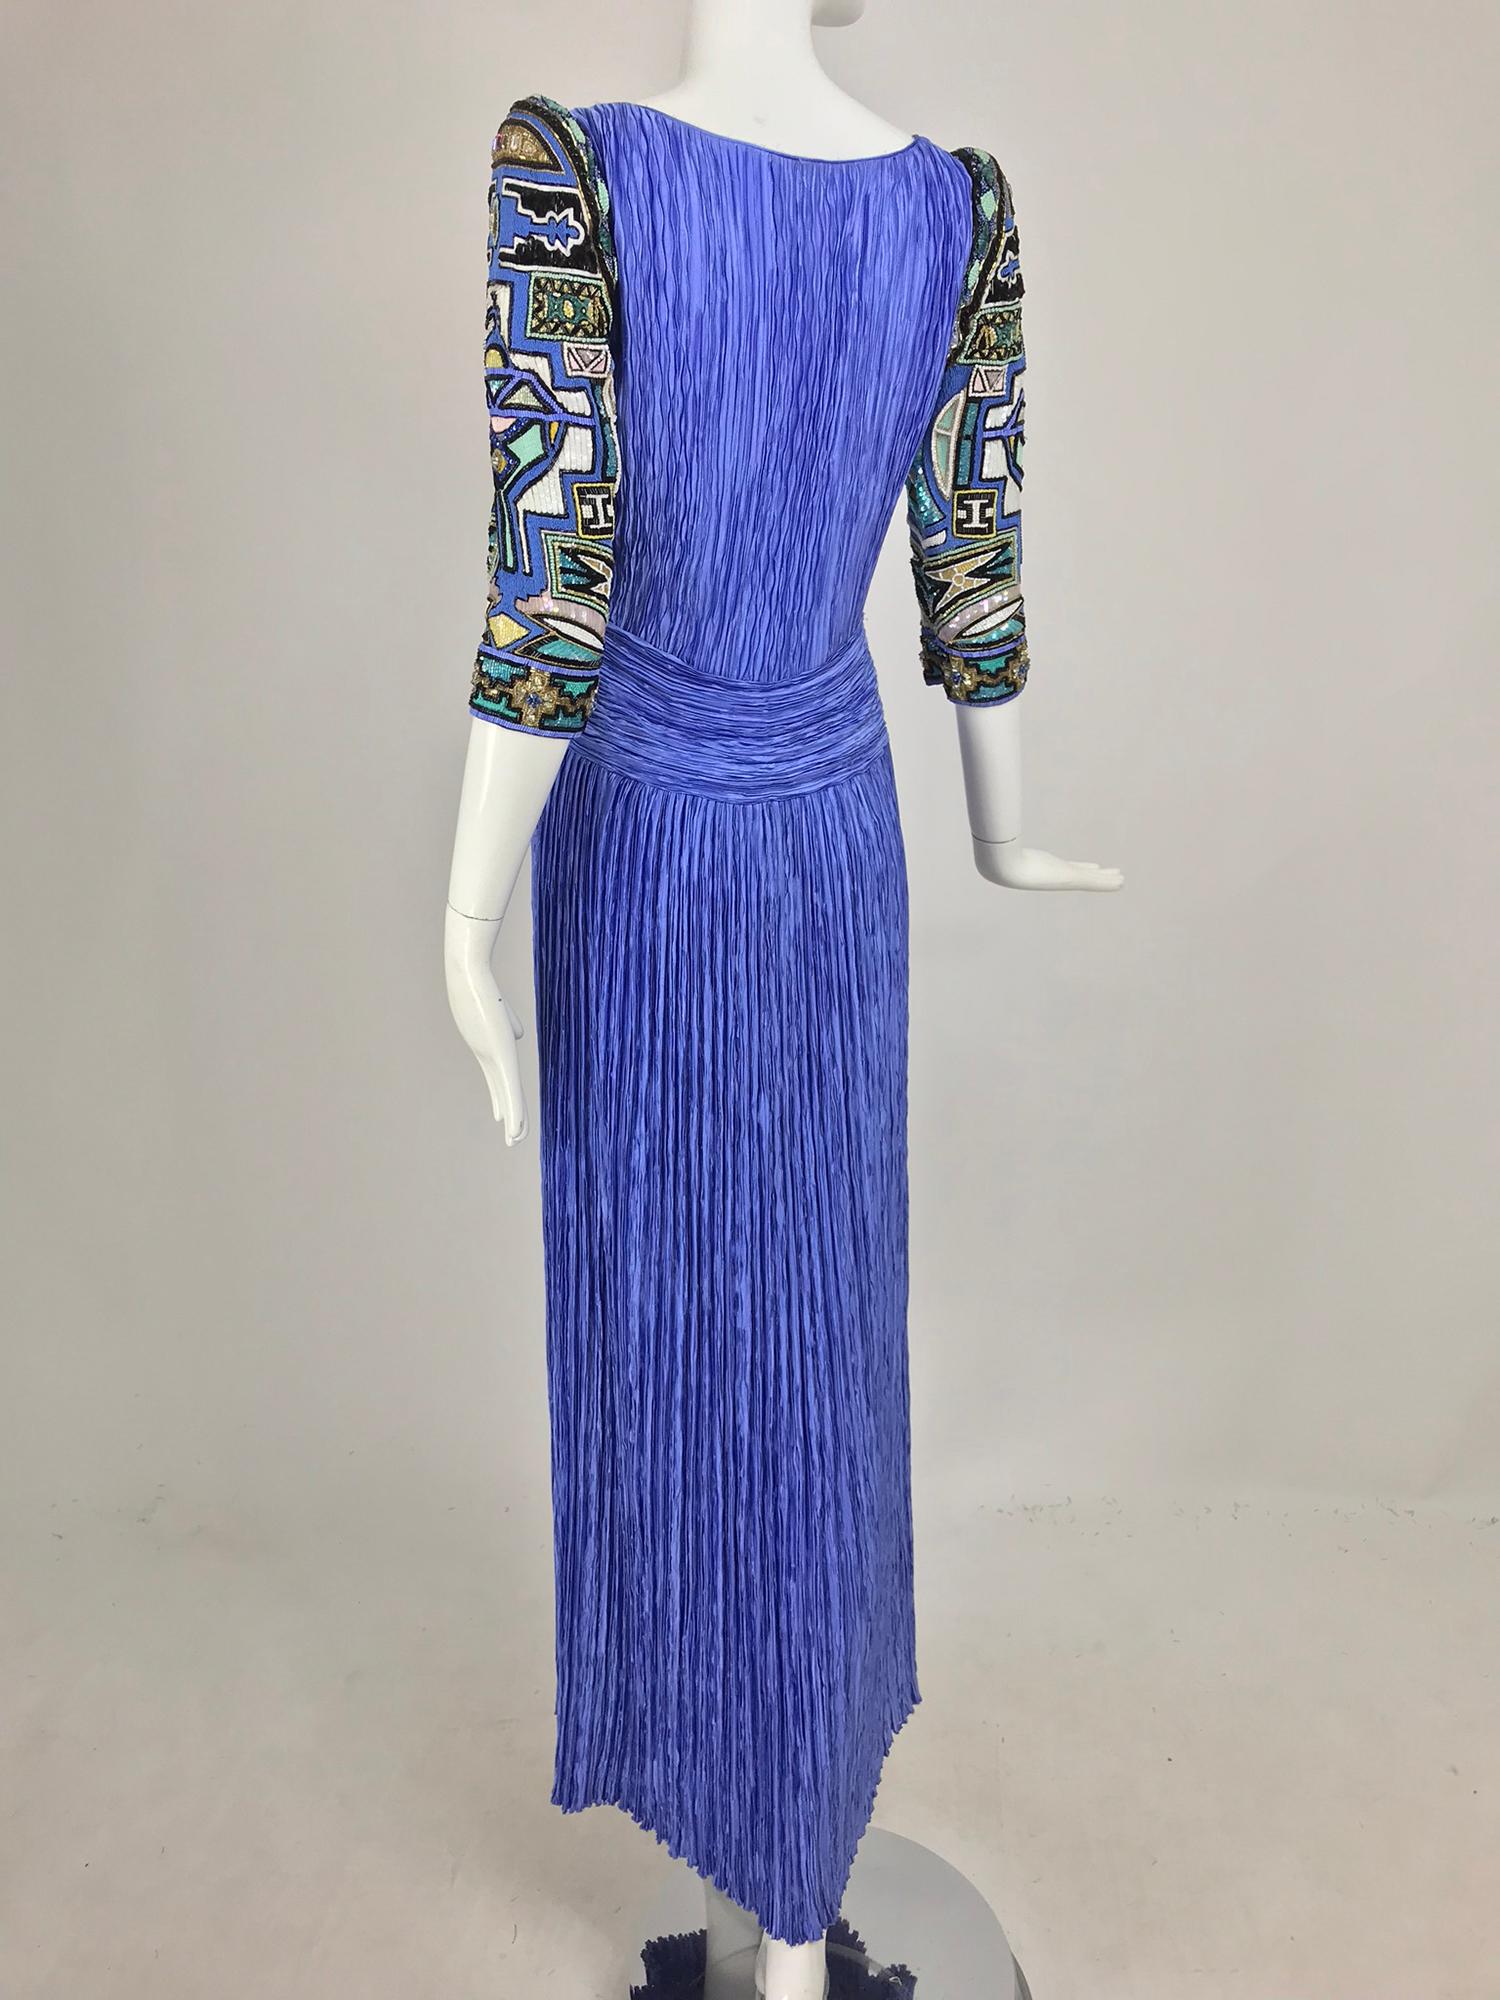 Mary McFadden Couture Art Beaded Pleated Evening Gown in Blue 1980s 3